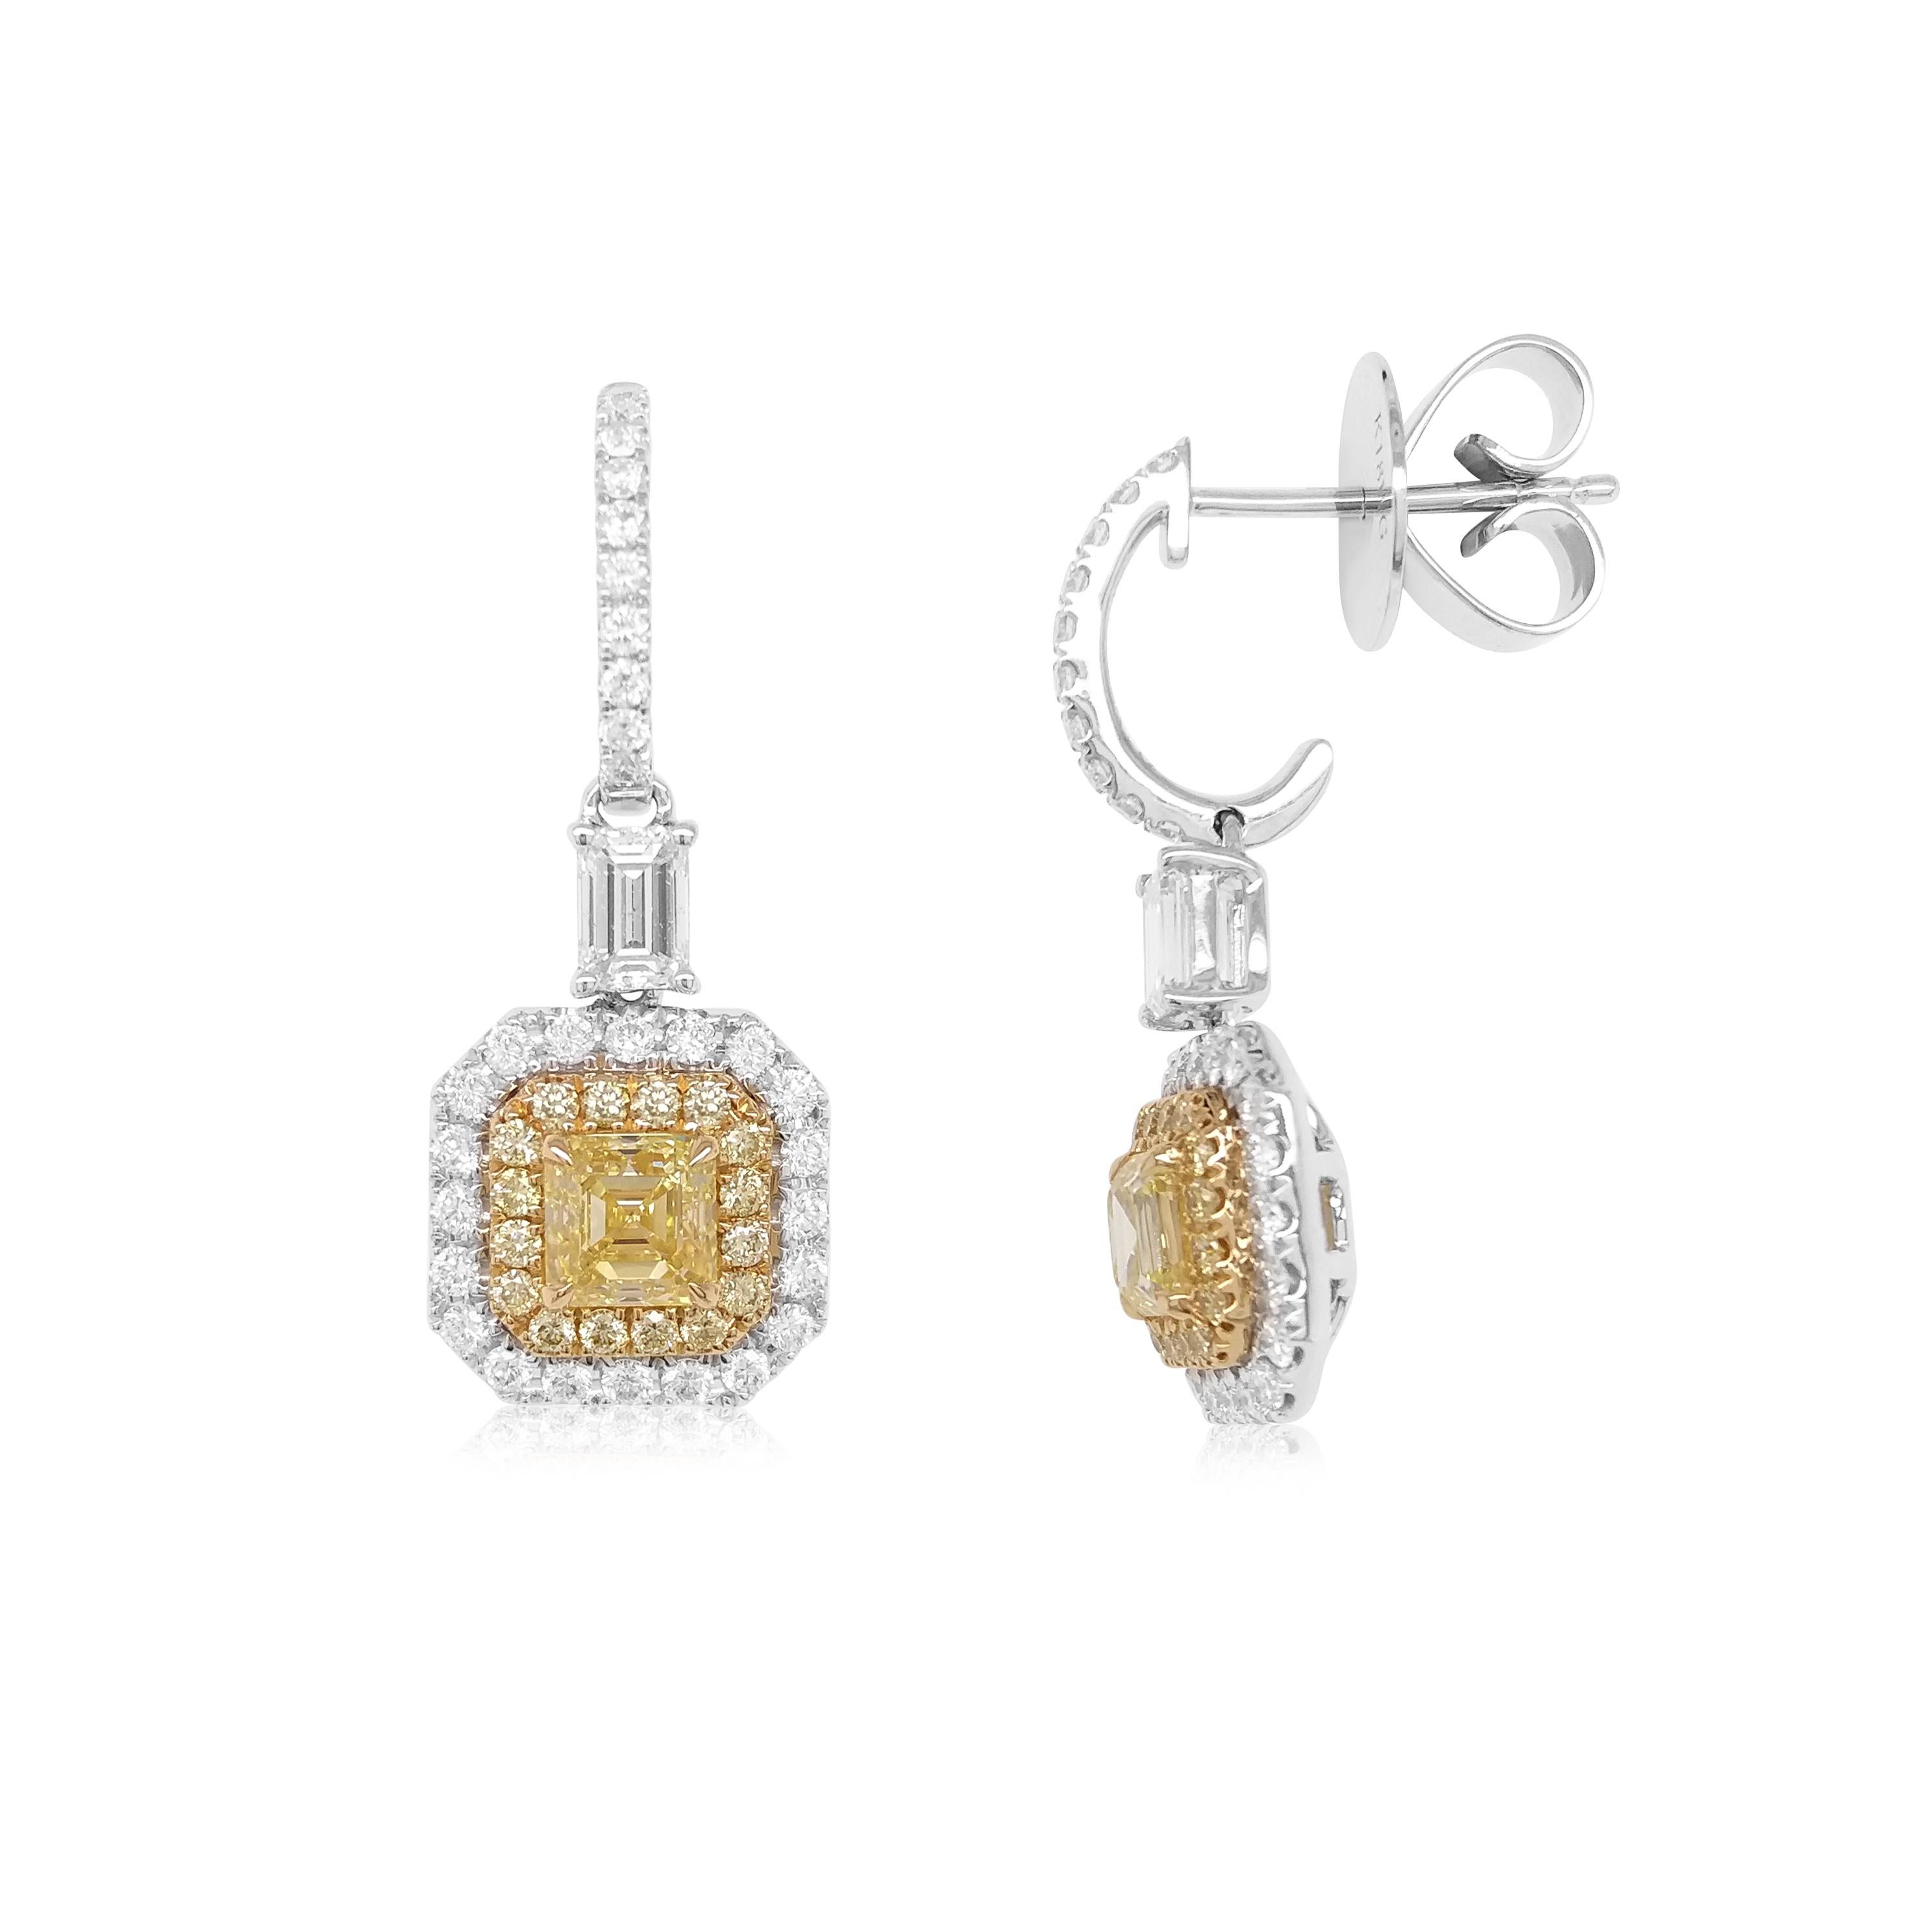 These intricate earrings feature glistening square-emerald-cut Yellow diamonds at the heart of the design, suspended from clusters of sparkling emerald-cut and round brilliant-cut white diamonds. Each diamond has been matched by our experts. 
-